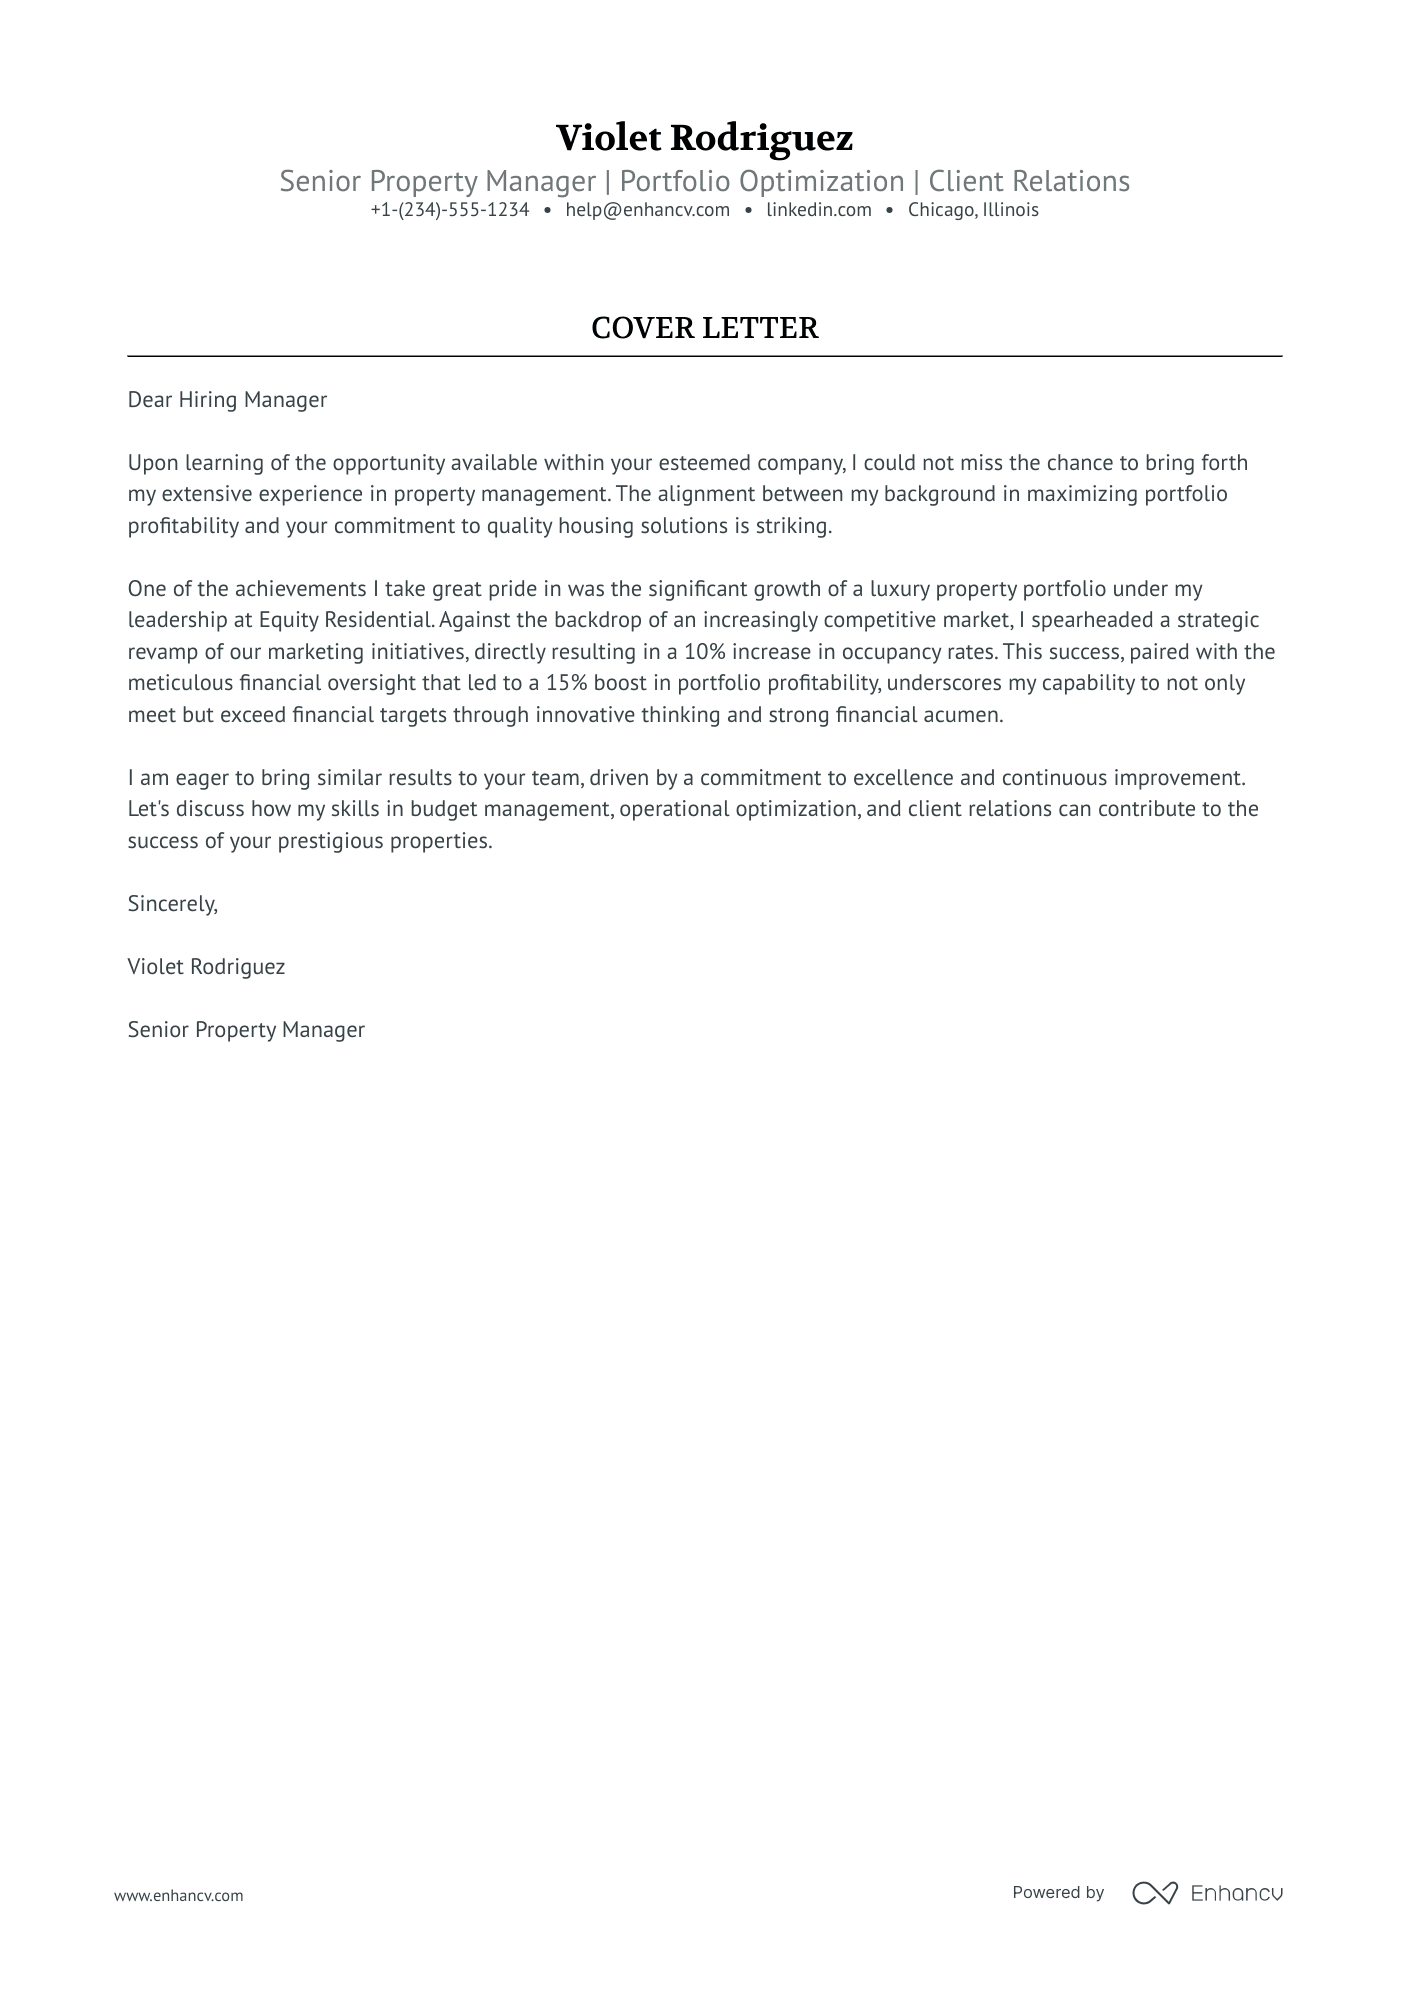 Regional Property Manager cover letter